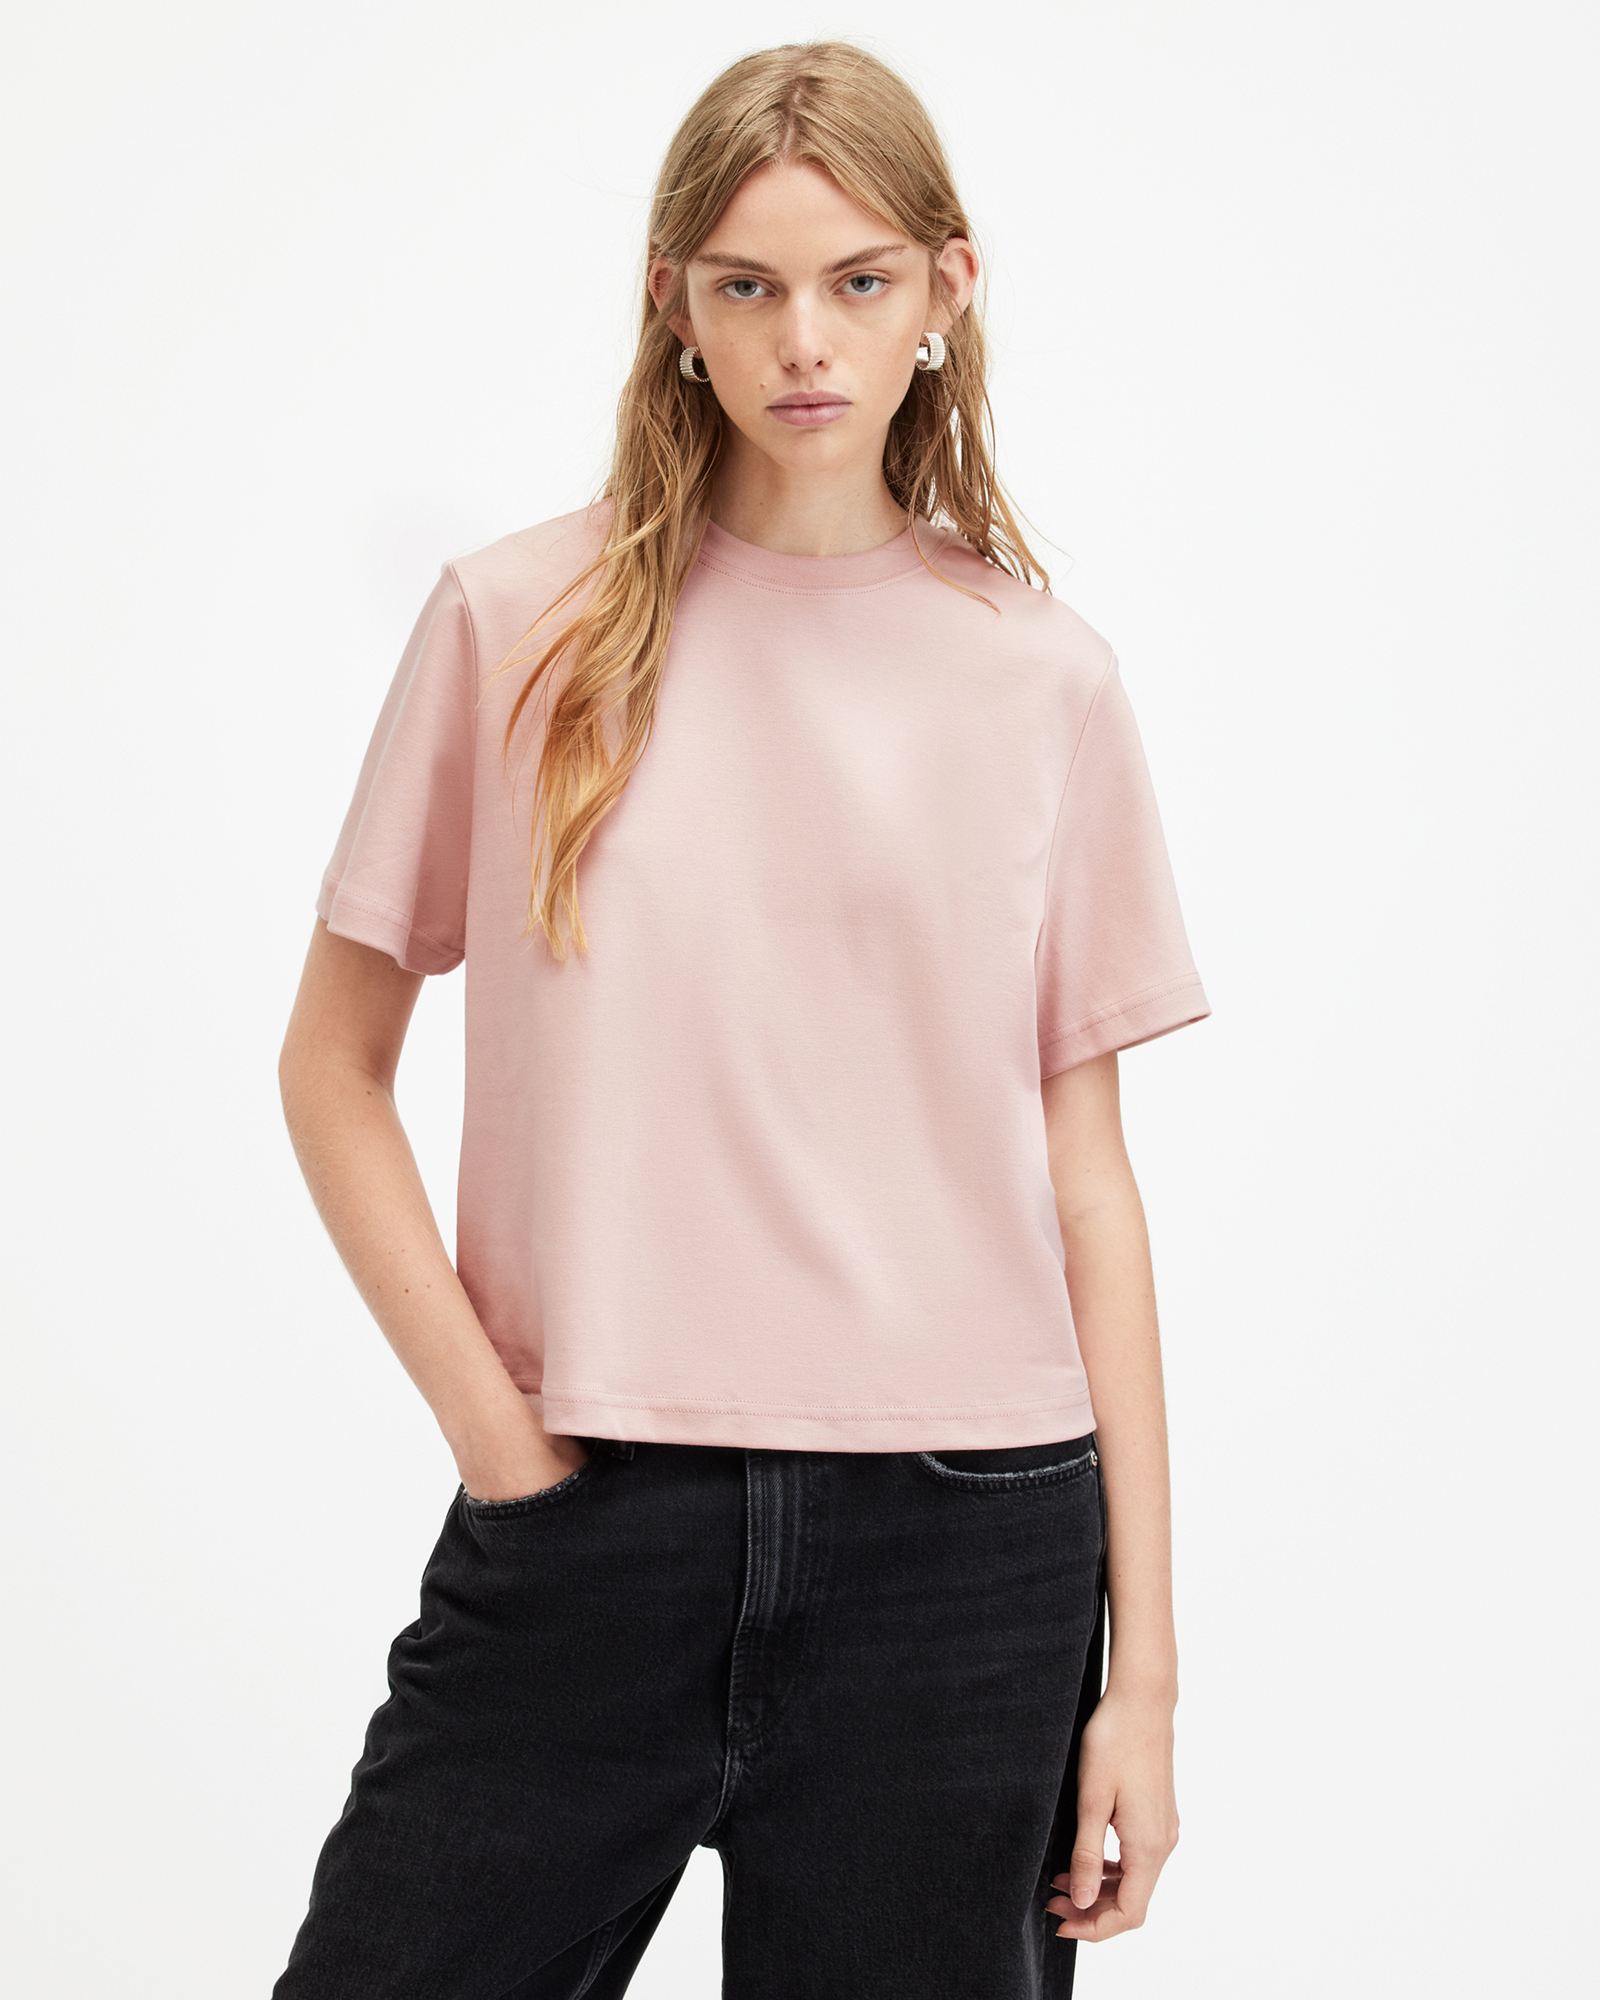 AllSaints Lisa Oversized Boxy Crew Neck T-Shirt,, PINK ORCHID